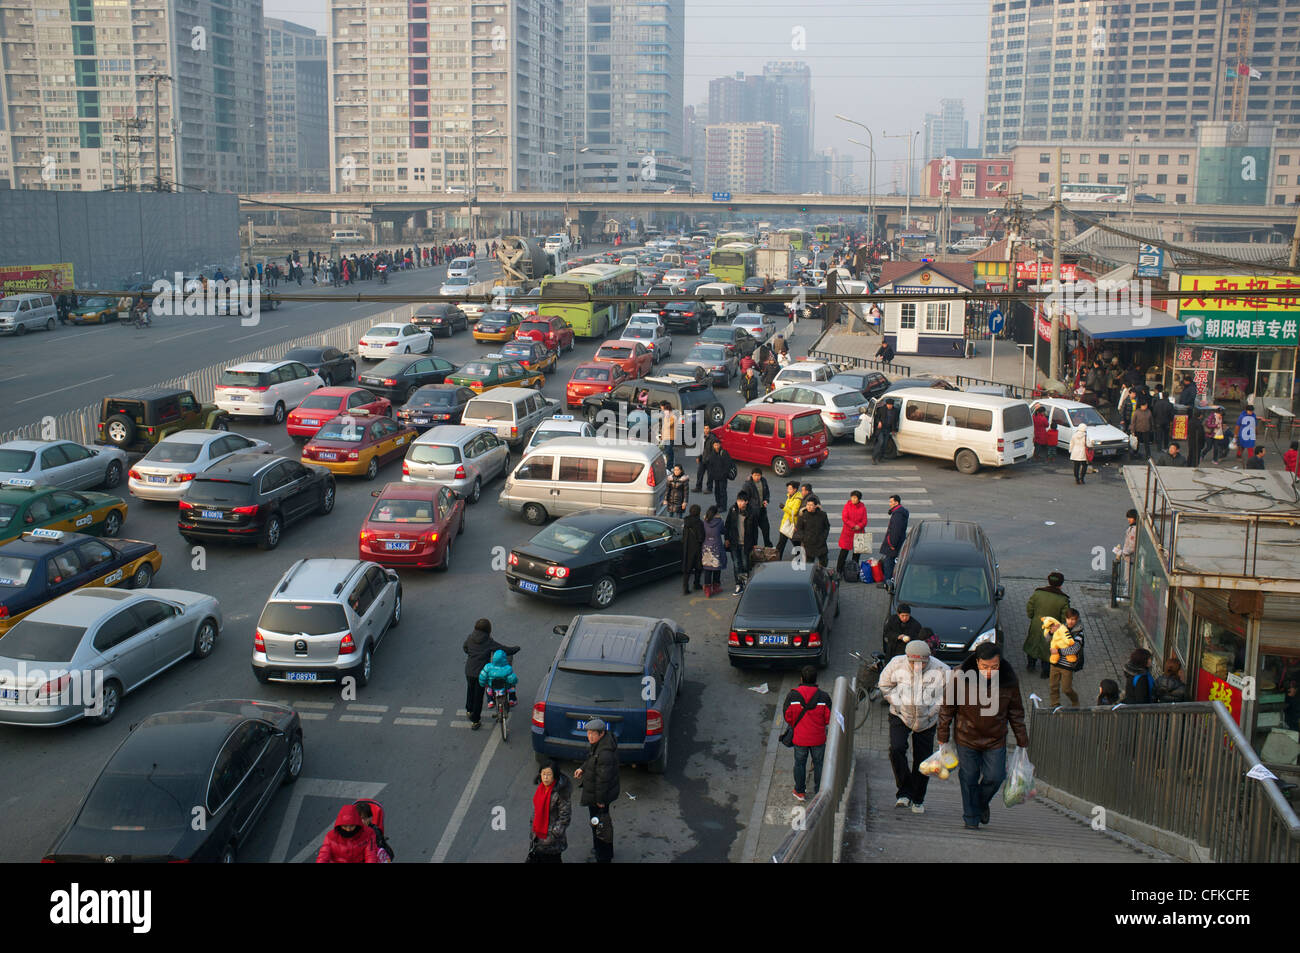 General scene with cars and apartment buildings in Beijing, China. 07-Jan-2012 Stock Photo